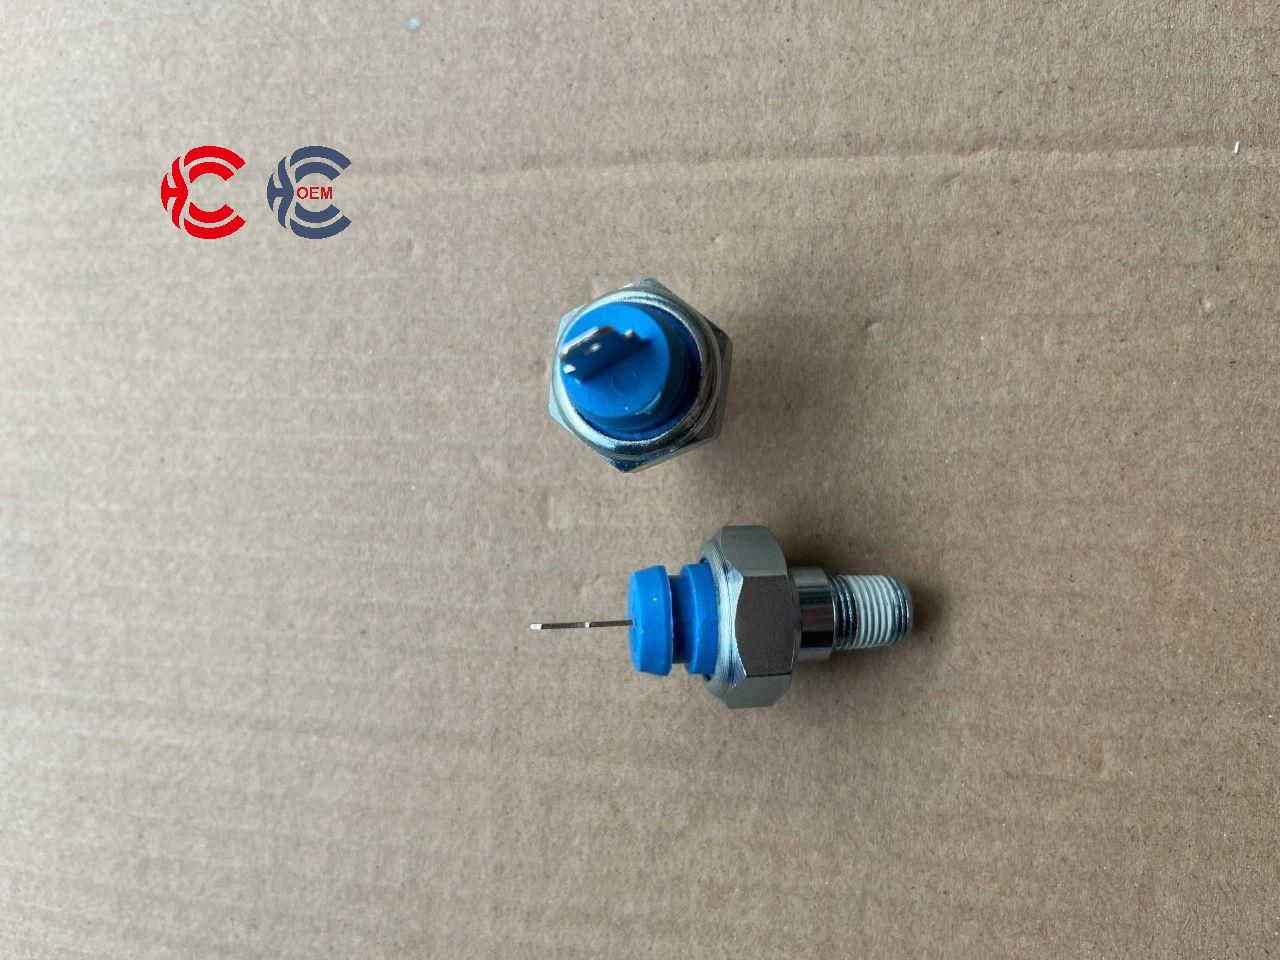 OEM: 2848062Material: ABS MetalColor: GoldenOrigin: Made in ChinaWeight: 100gPacking List: 1* Pressure Sensor More ServiceWe can provide OEM Manufacturing serviceWe can Be your one-step solution for Auto PartsWe can provide technical scheme for you Feel Free to Contact Us, We will get back to you as soon as possible.